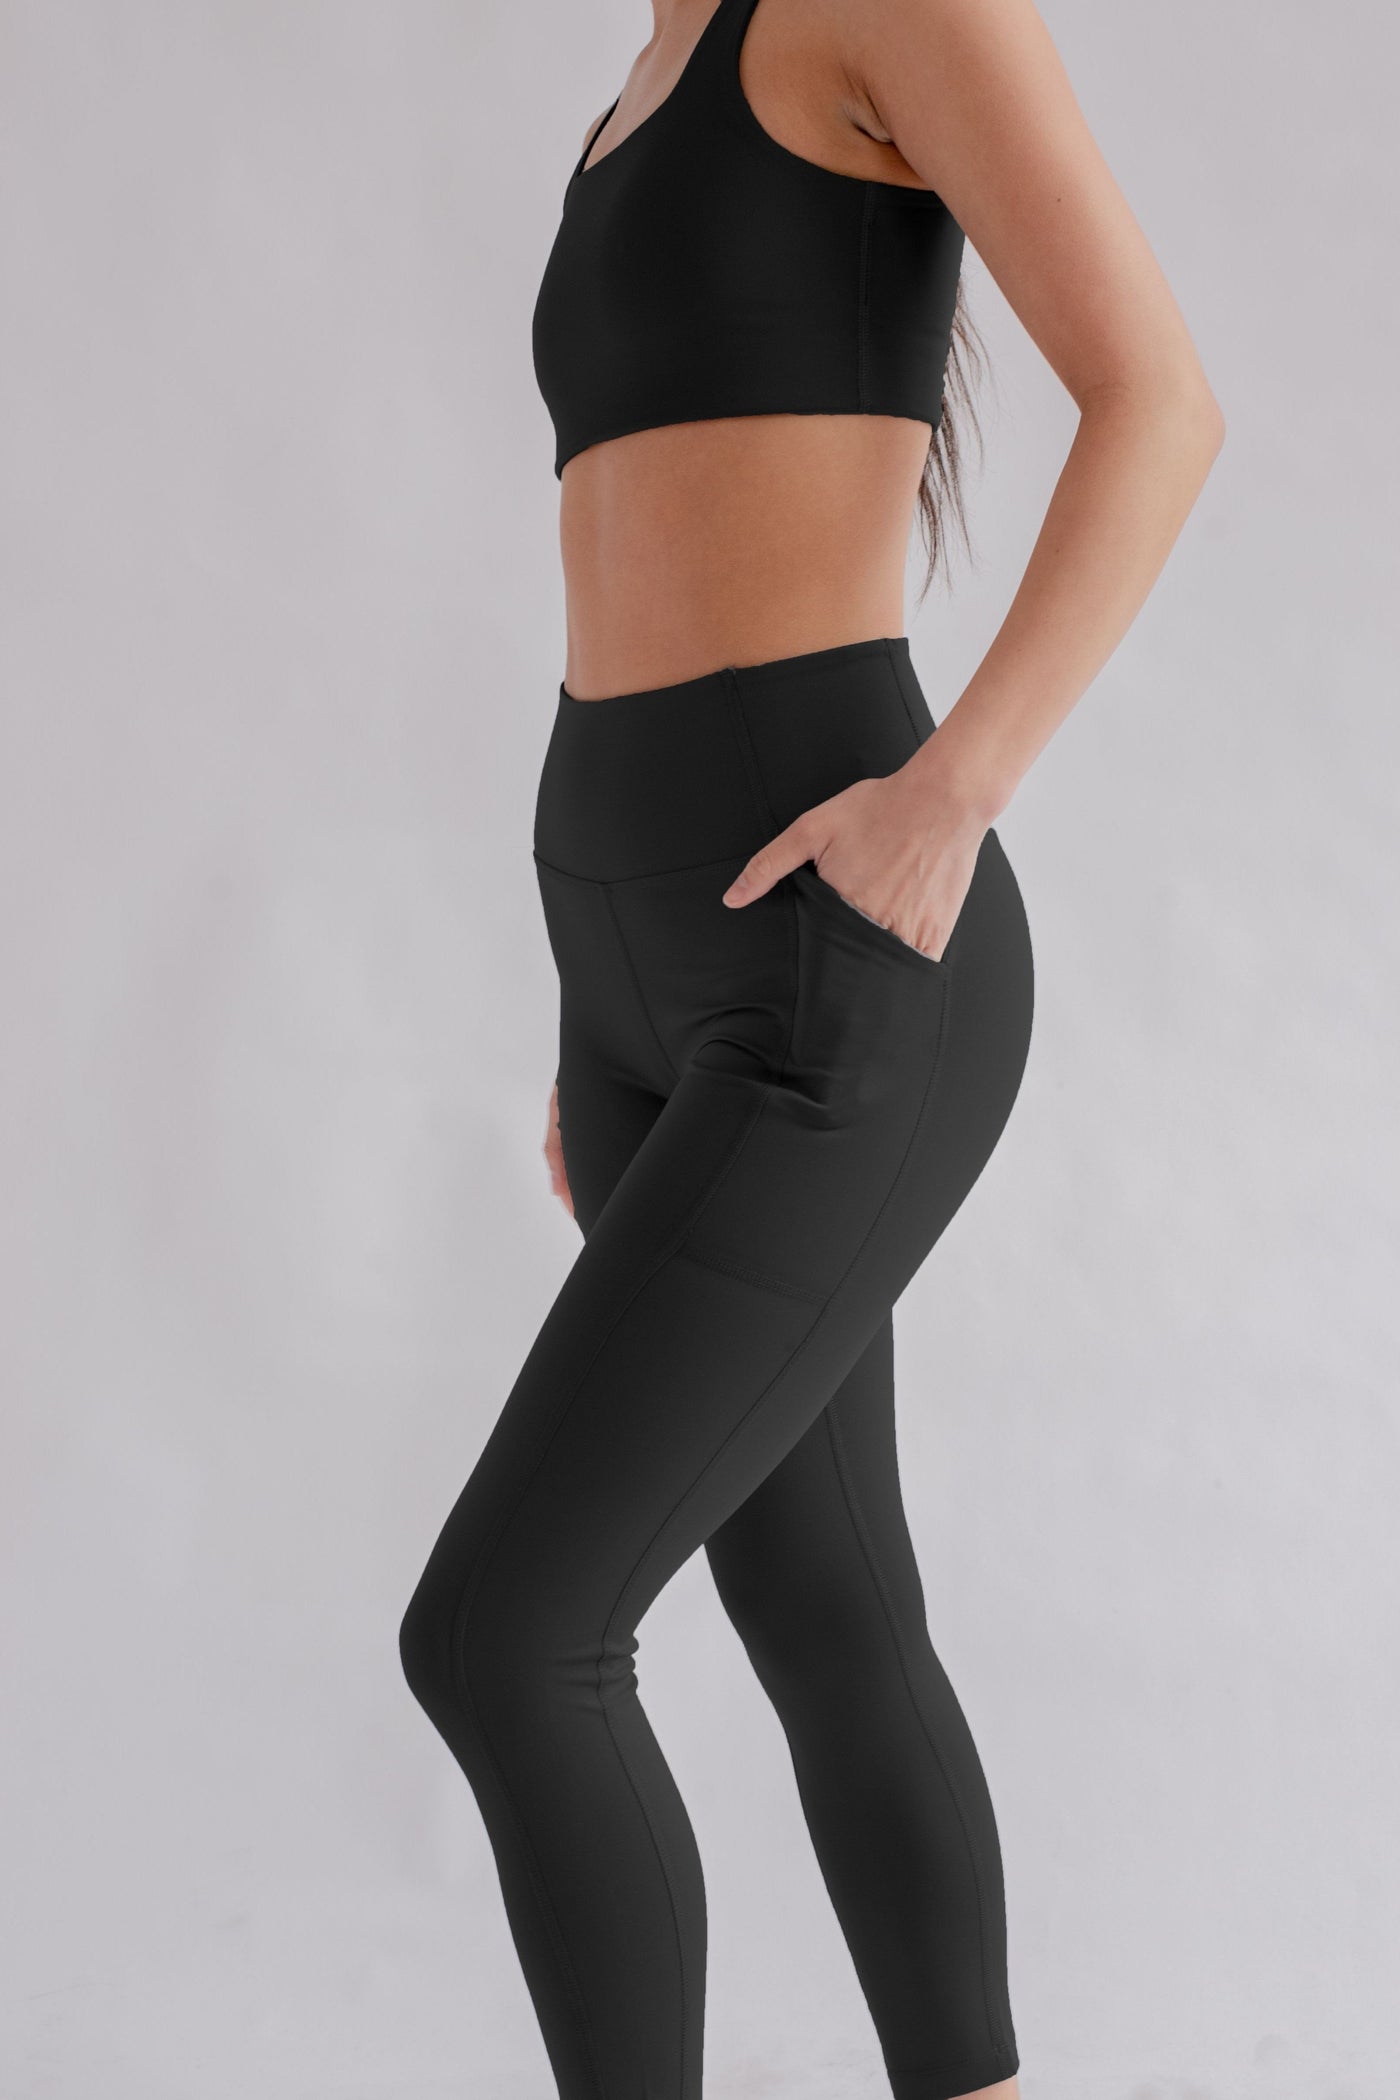 Girlfriend Collective Black Pocket Leggings High Rise, 7/8-Womens-Ohh! By Gum - Shop Sustainable